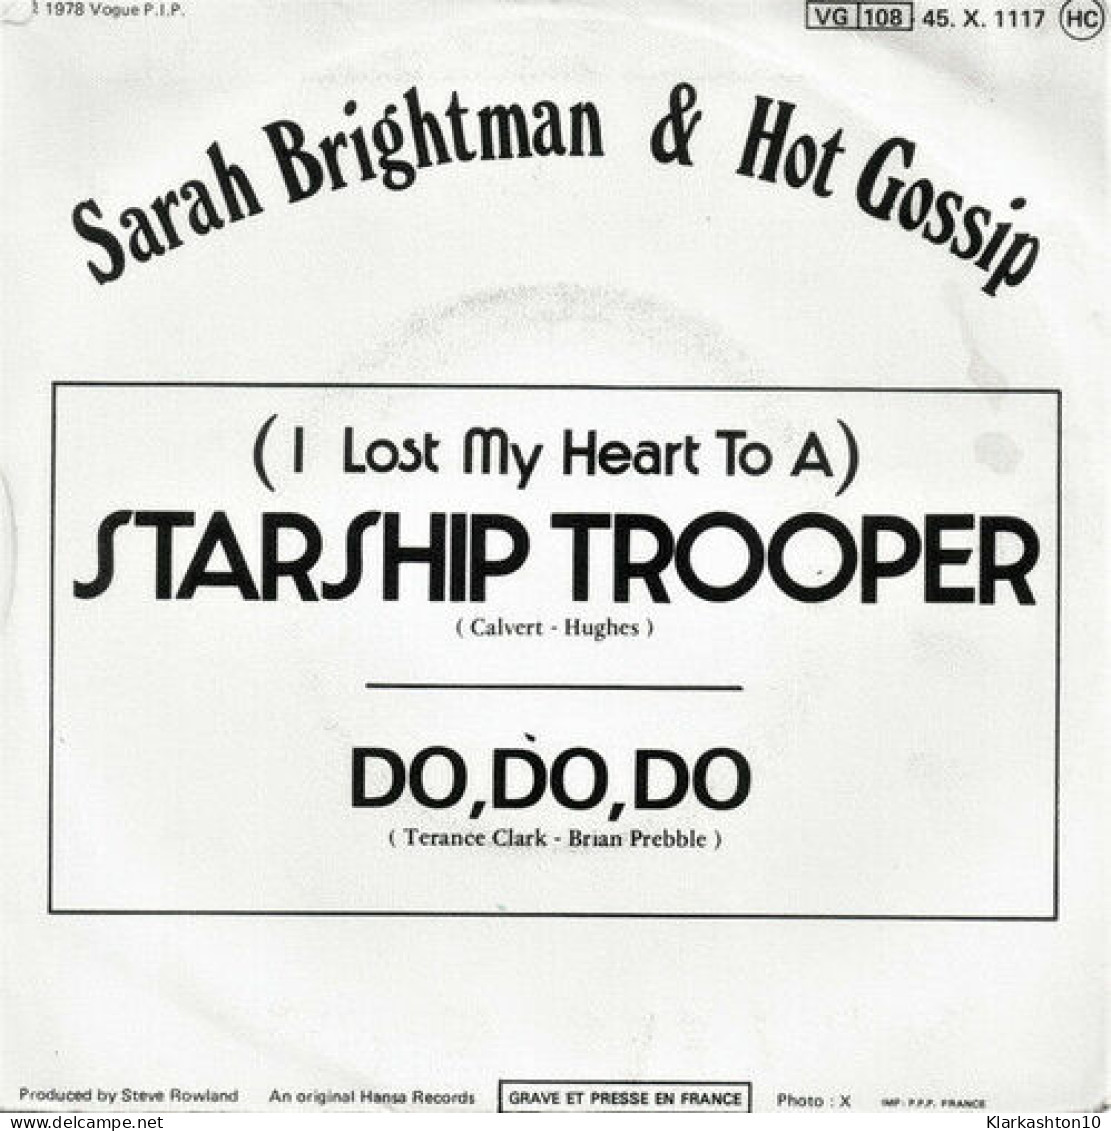 (I Lost My Heart To A) Starship Trooper - Sin Clasificación